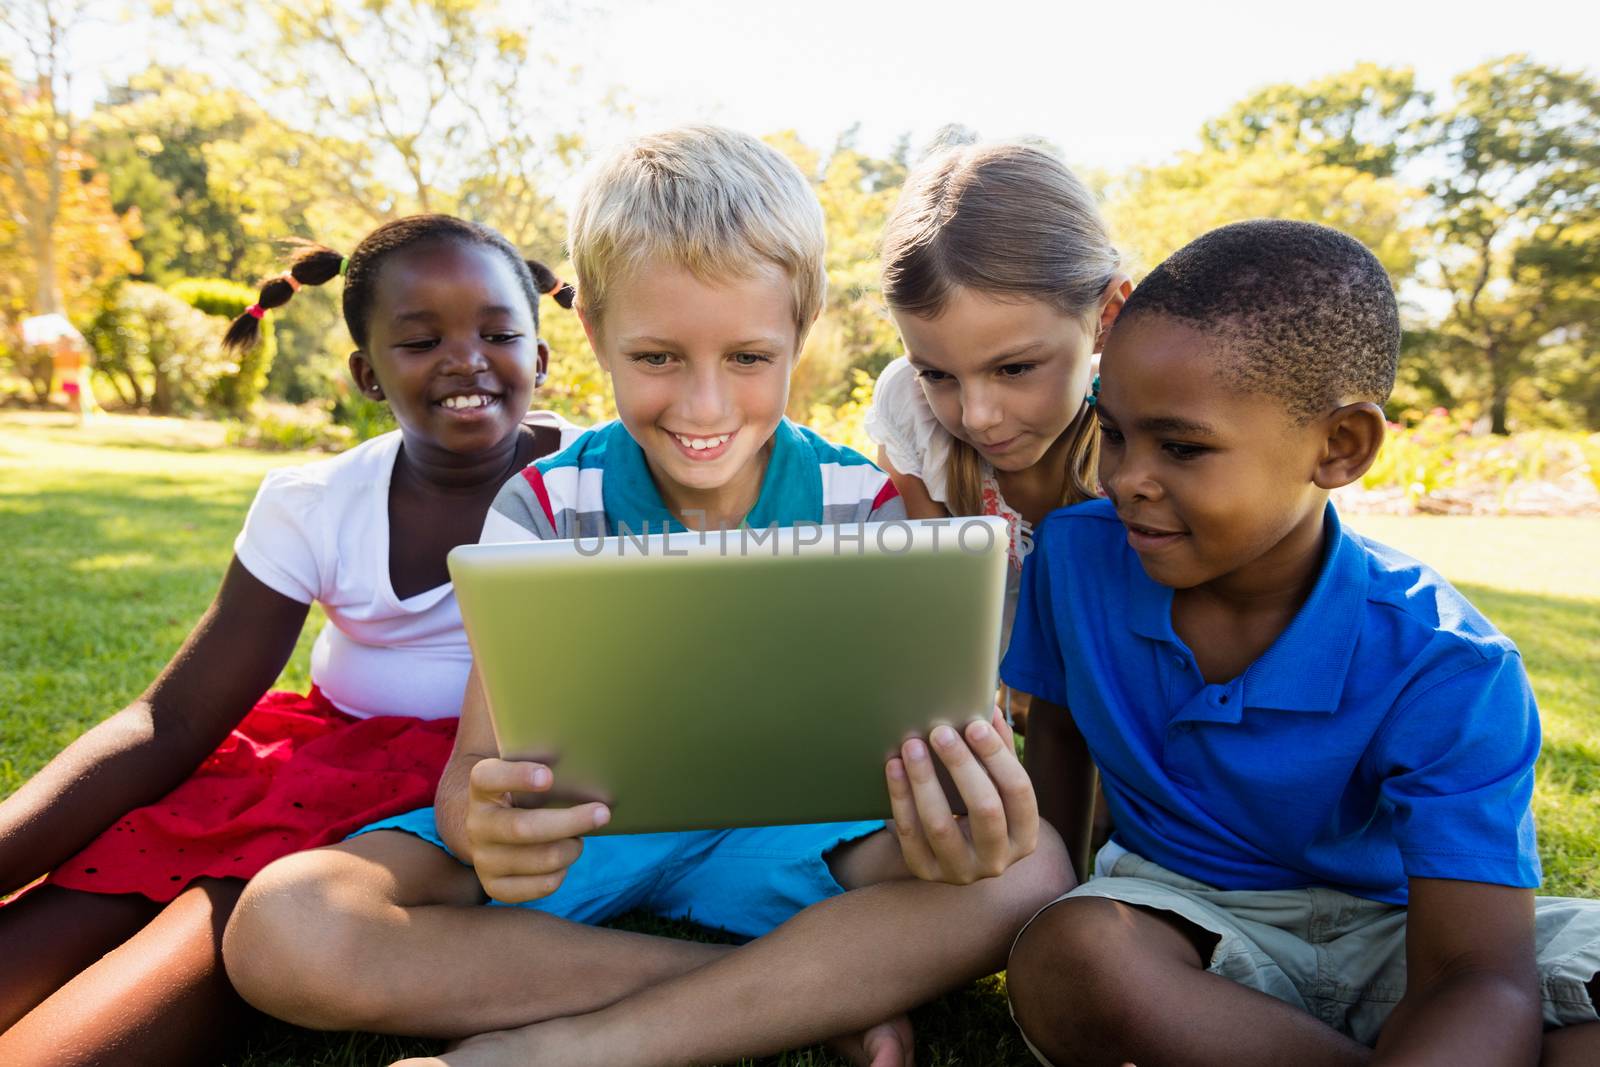 Kids using technology during a sunny day by Wavebreakmedia